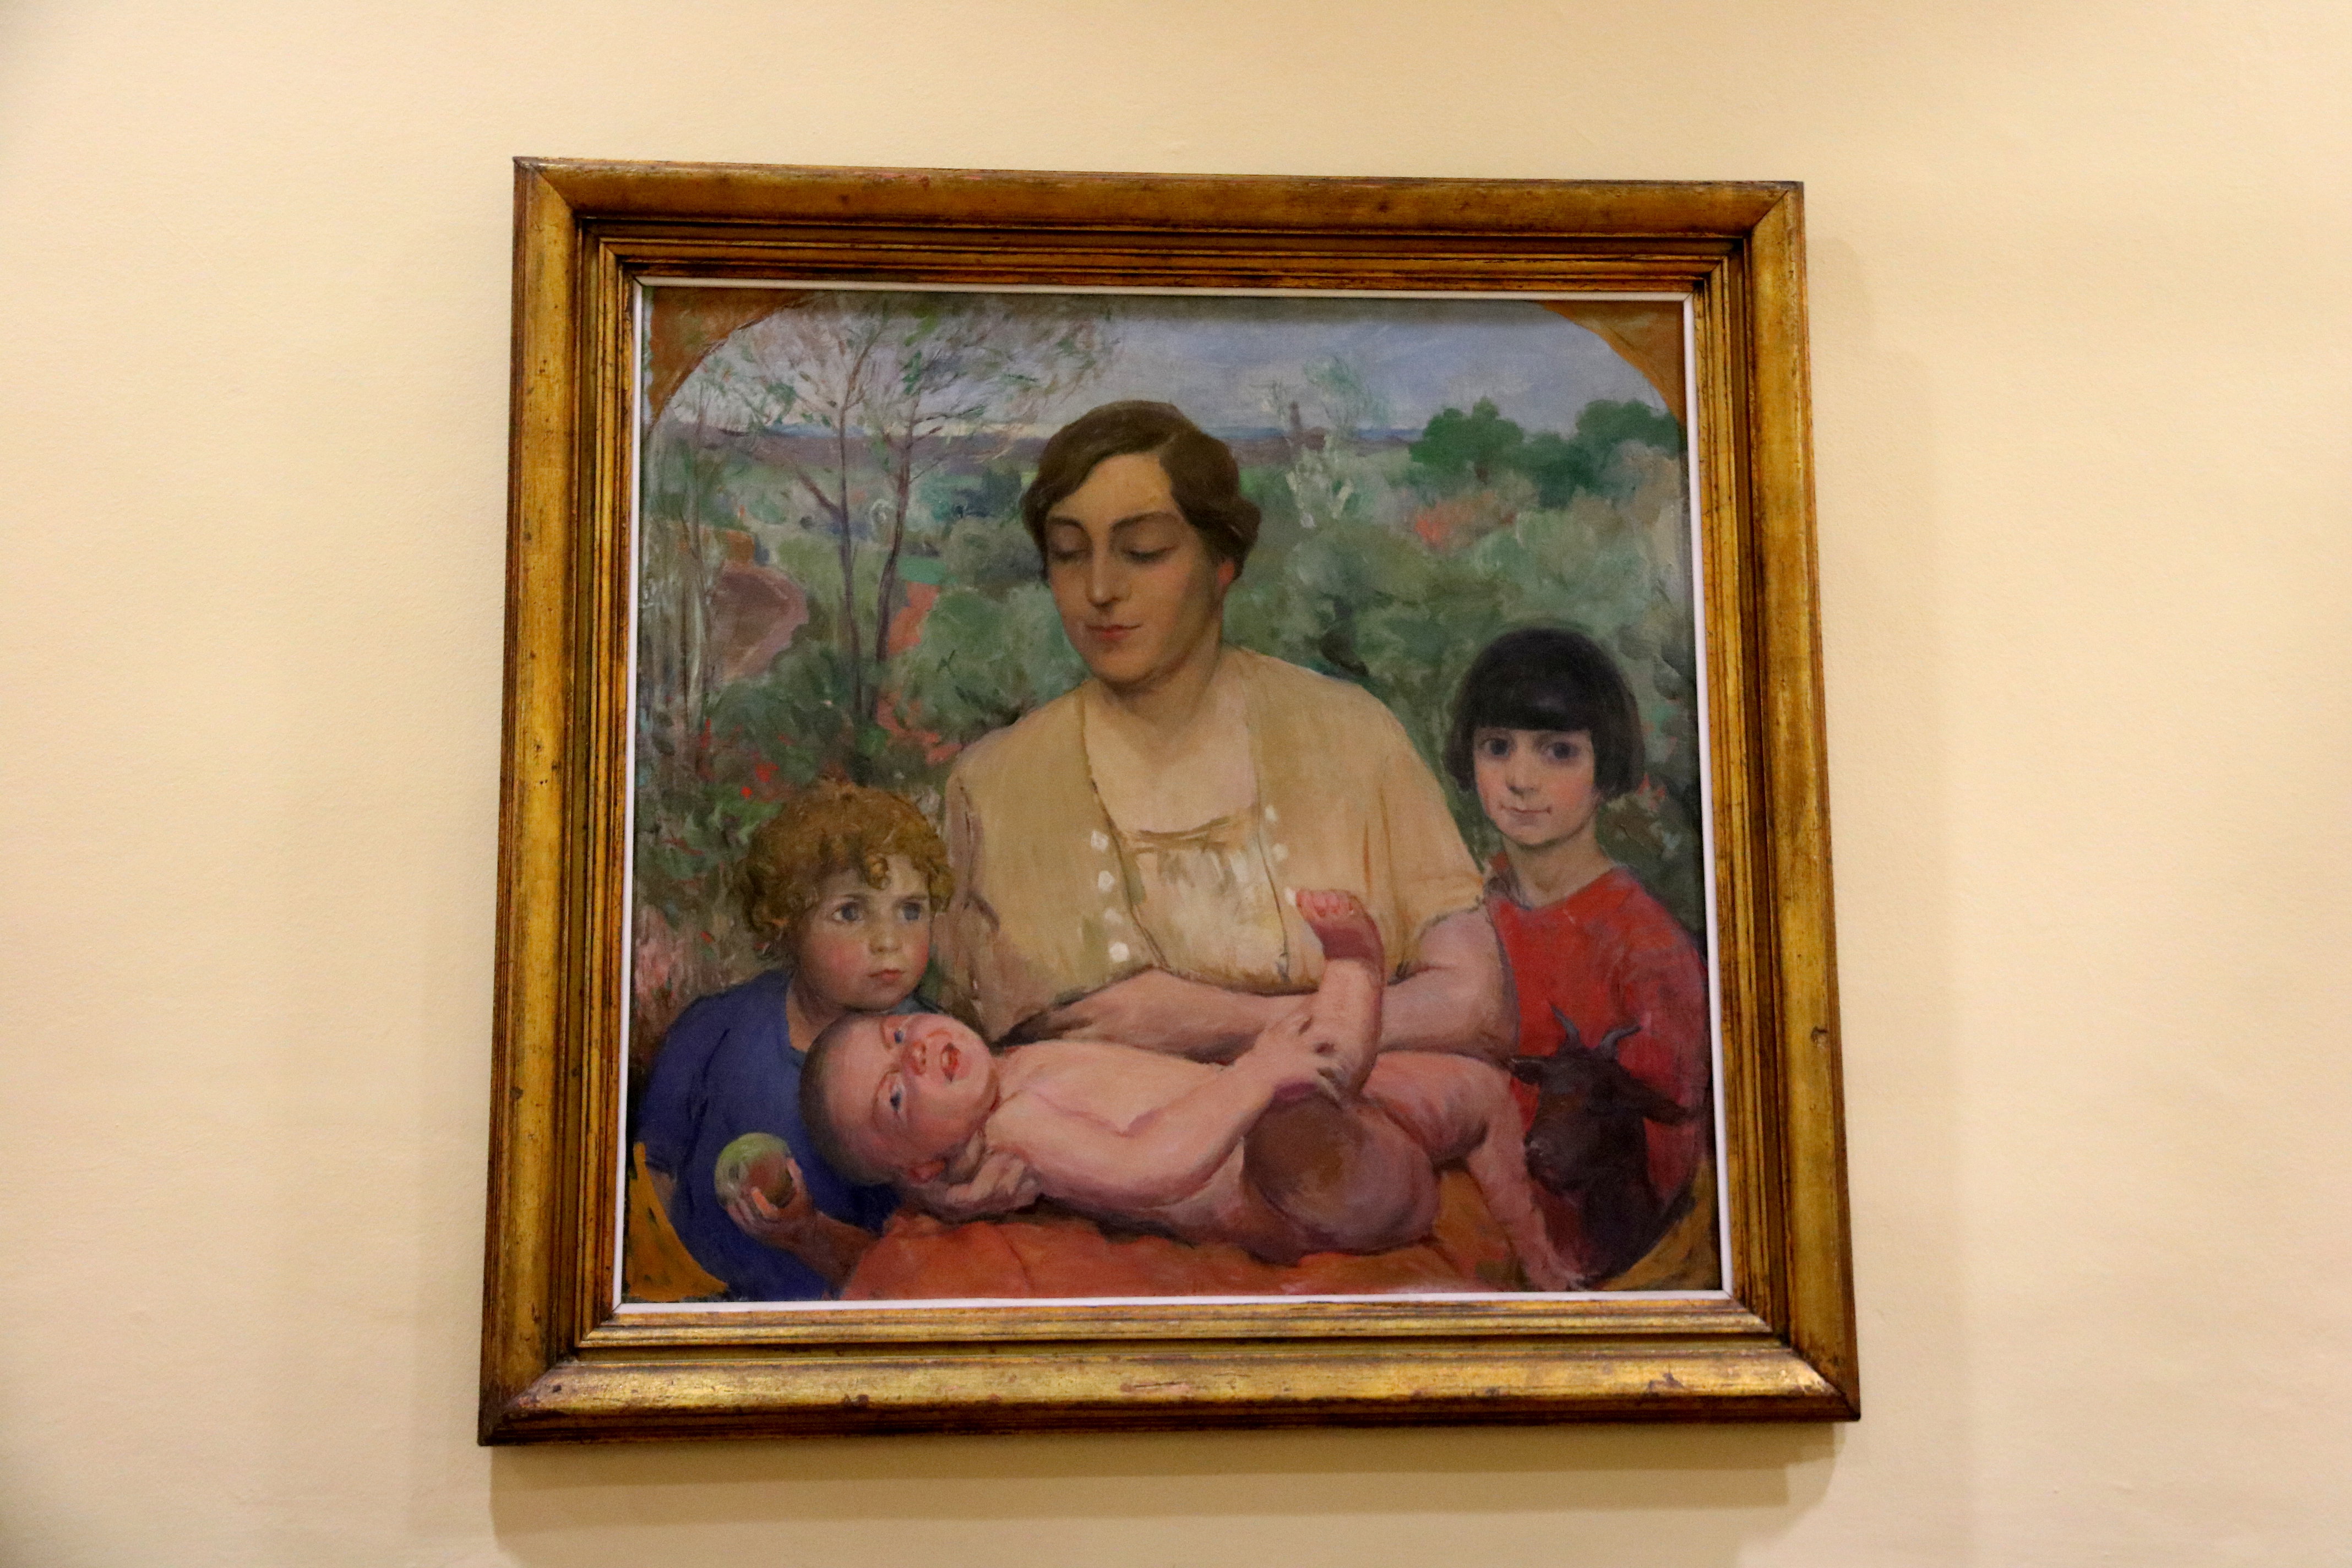 A protrait of the Cabanyes family by Alexandre Cabanyes on display at the 'Perpetuated surrounding' exhibit on February 21 2018 (by Gemma Sánchez)